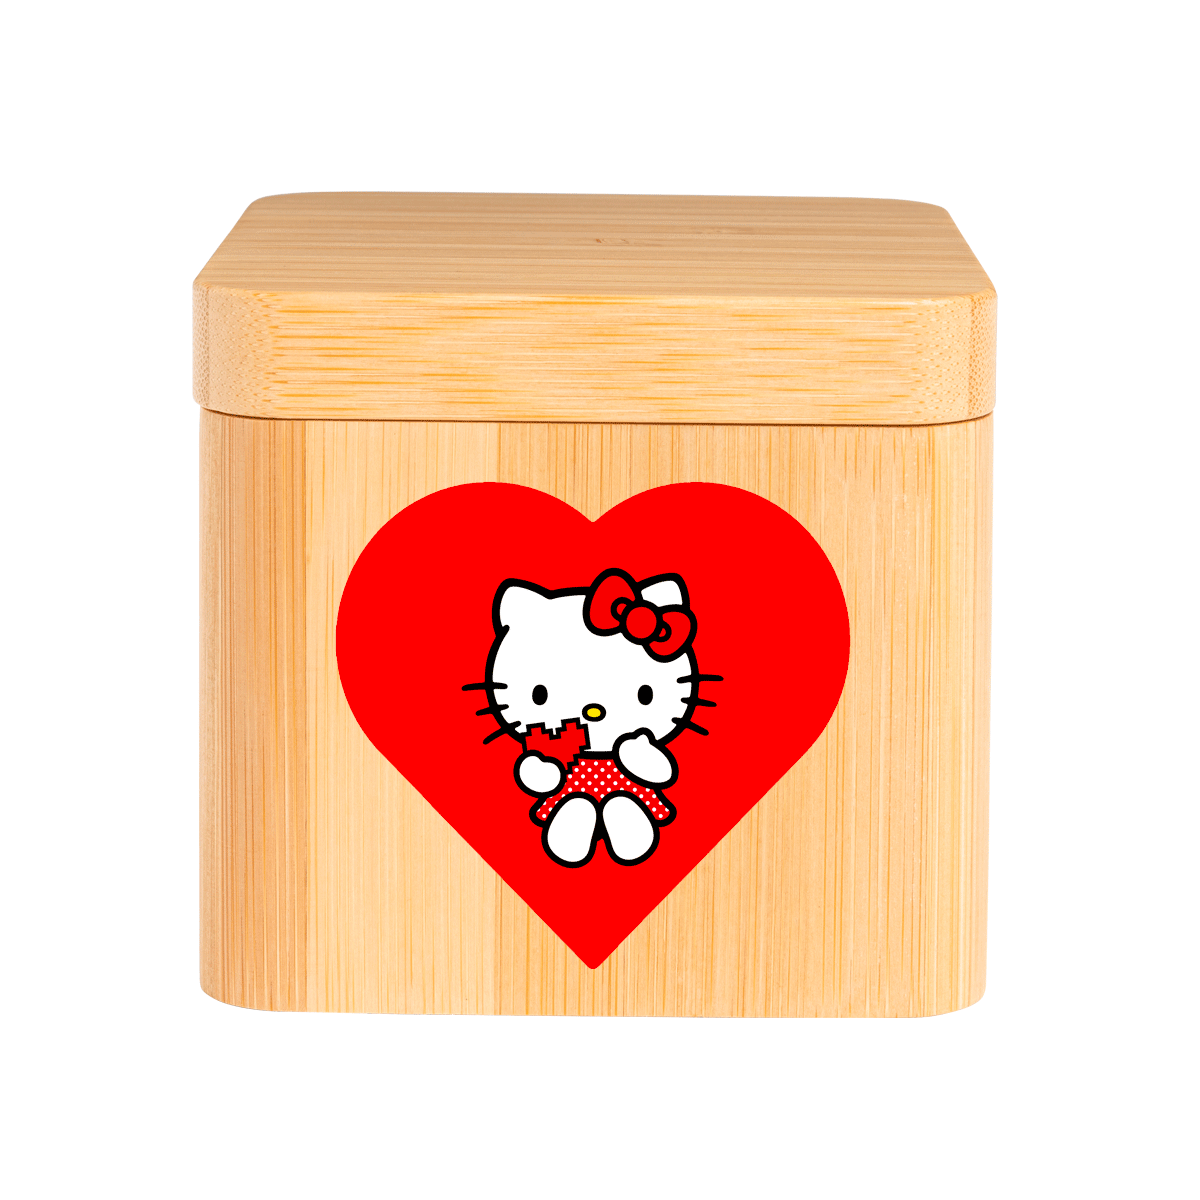 How to Make a Love Box for Your Boyfriend: 10 Steps